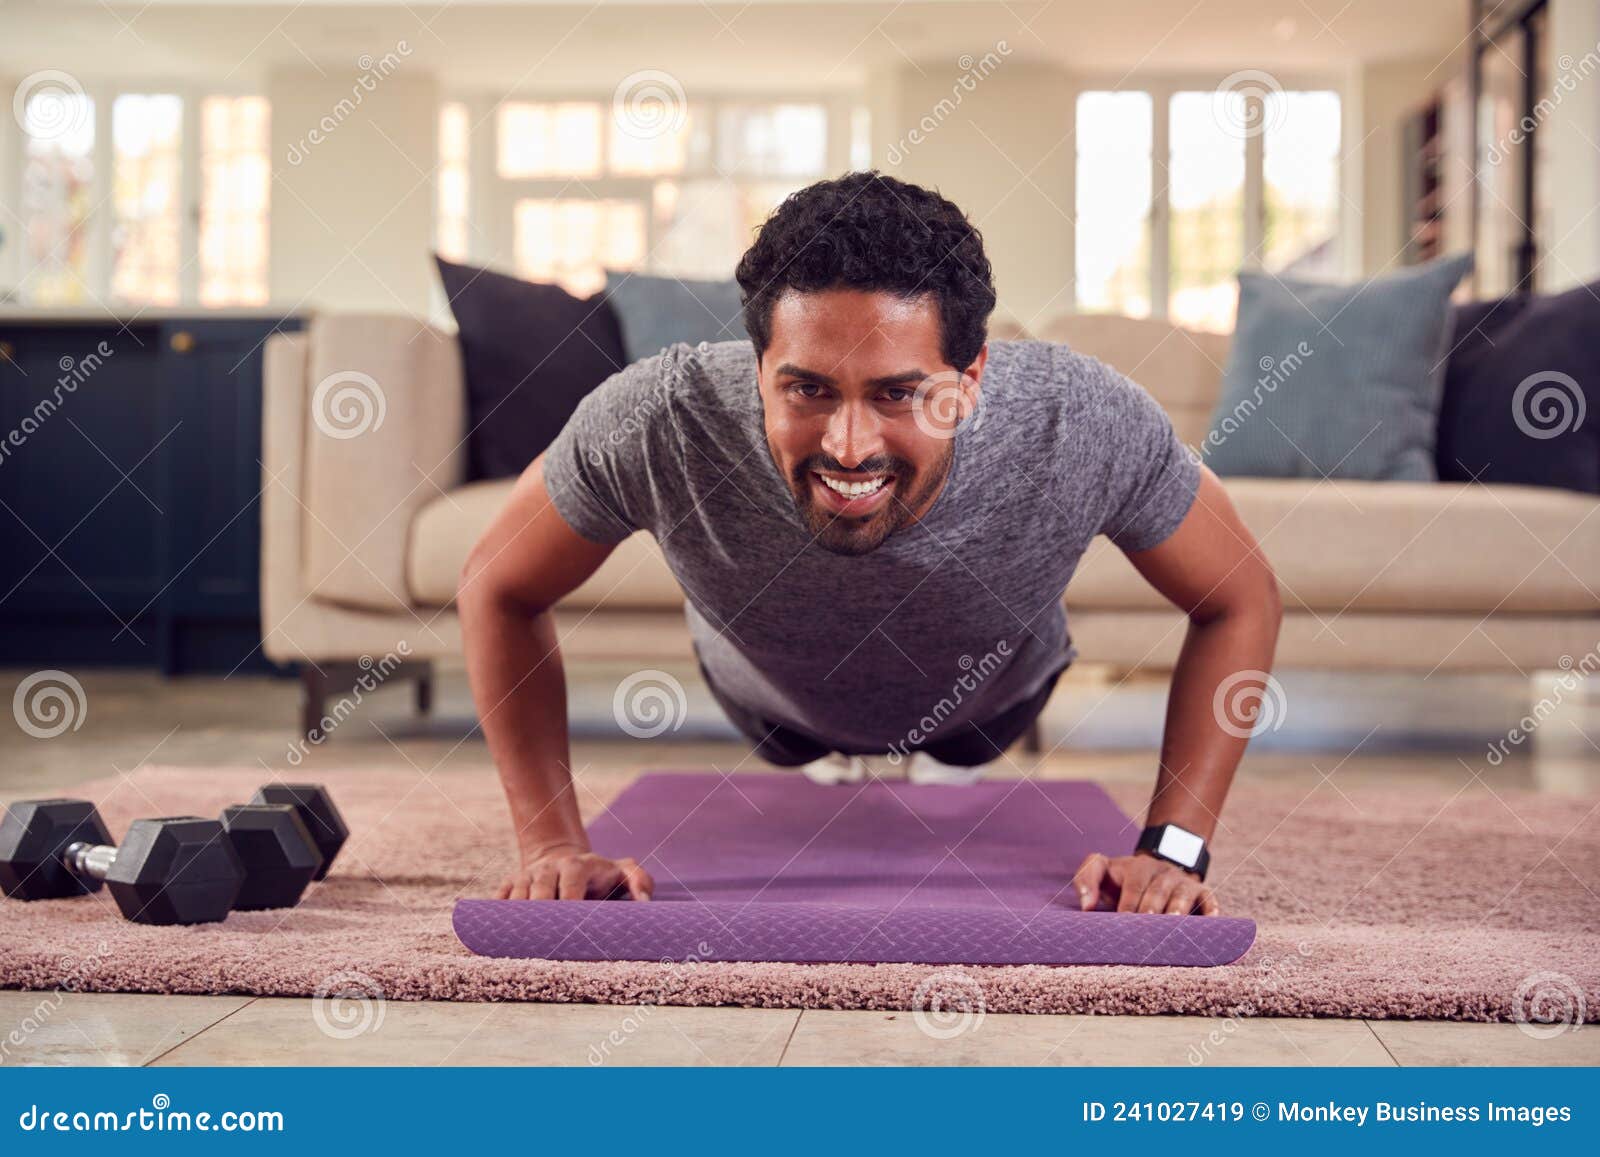 Man in Fitness Clothing at Home in Lounge Doing Press Ups and